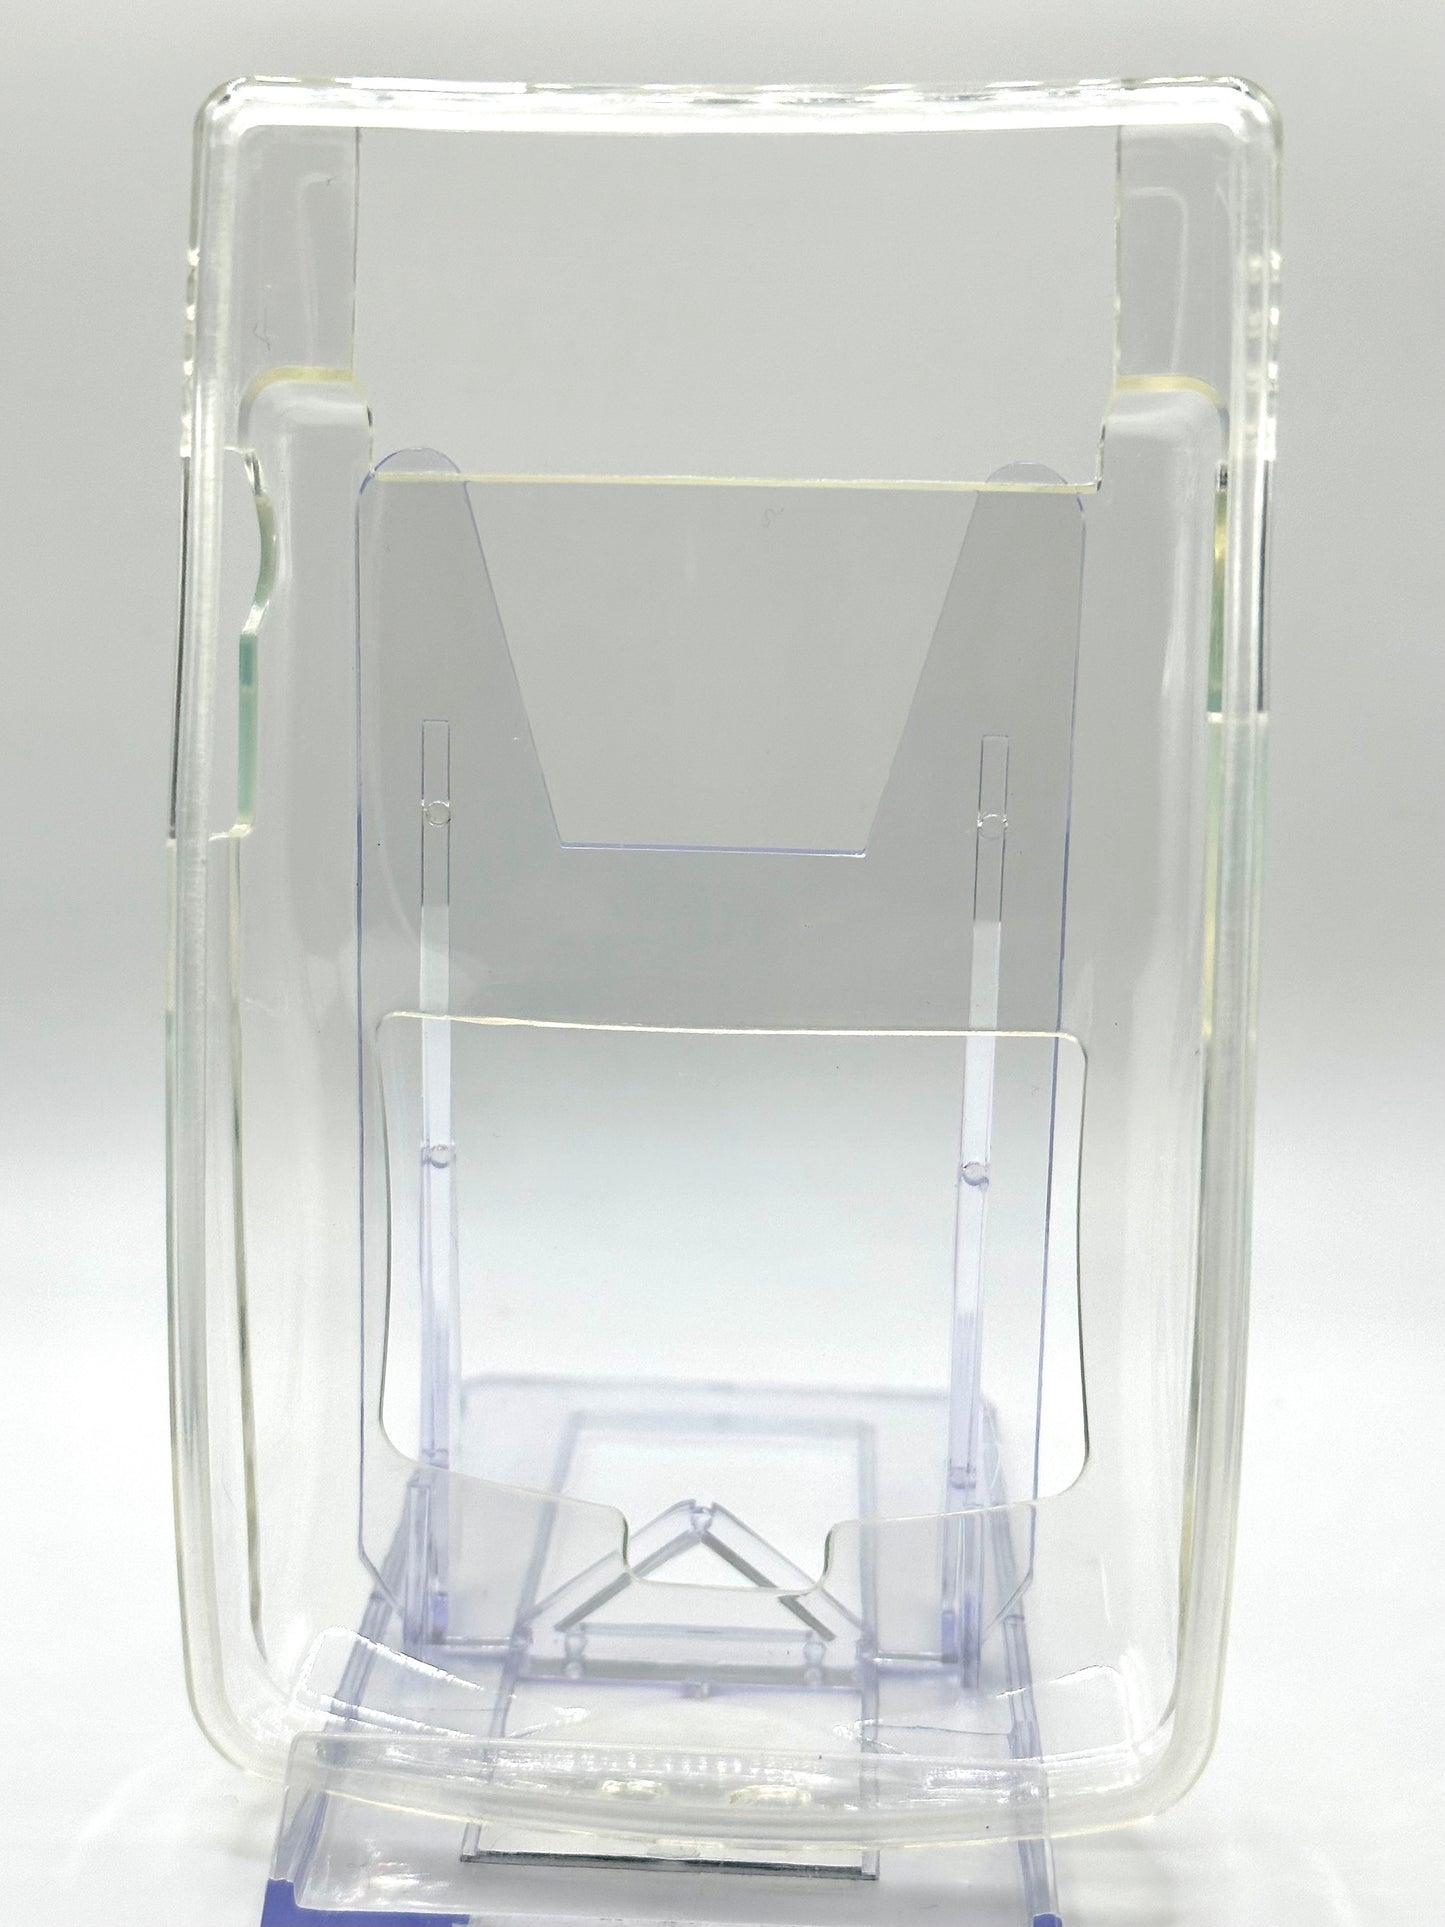 Clear Protective Case for Game Boy Color